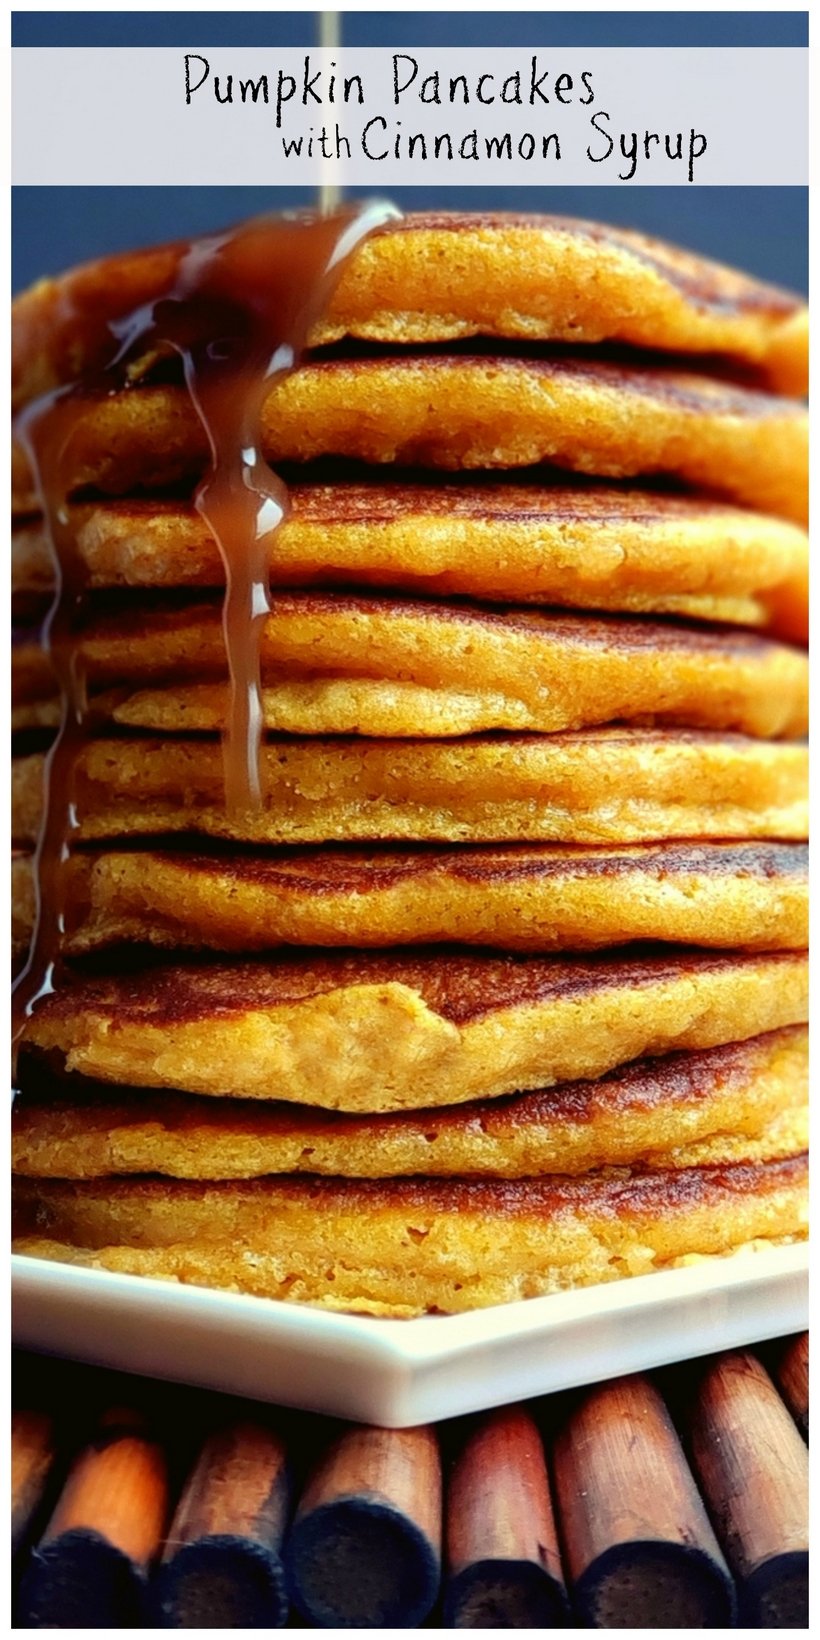 Easy Pumpkin Pancakes with Homemade Cinnamon syrup are extra fluffy and made from scratch. These pumpkin pancakes and syrup are made from everyday ingredients and the easy answer to a flavor packed fall breakfast. The easy homemade syrup recipe is perfect for pumpkin recipes. This is a great fall breakfast idea. #noblepig #pumpkinpancakes #pumpkinrecipes #homemadesyruprecipe #pumpkinpancakerecipe #fallbreakfastideas #homemadesyrupforpancakes #pumpkinpancakeseasy #fallbreakfast #homemadesyrup  via @cmpollak1